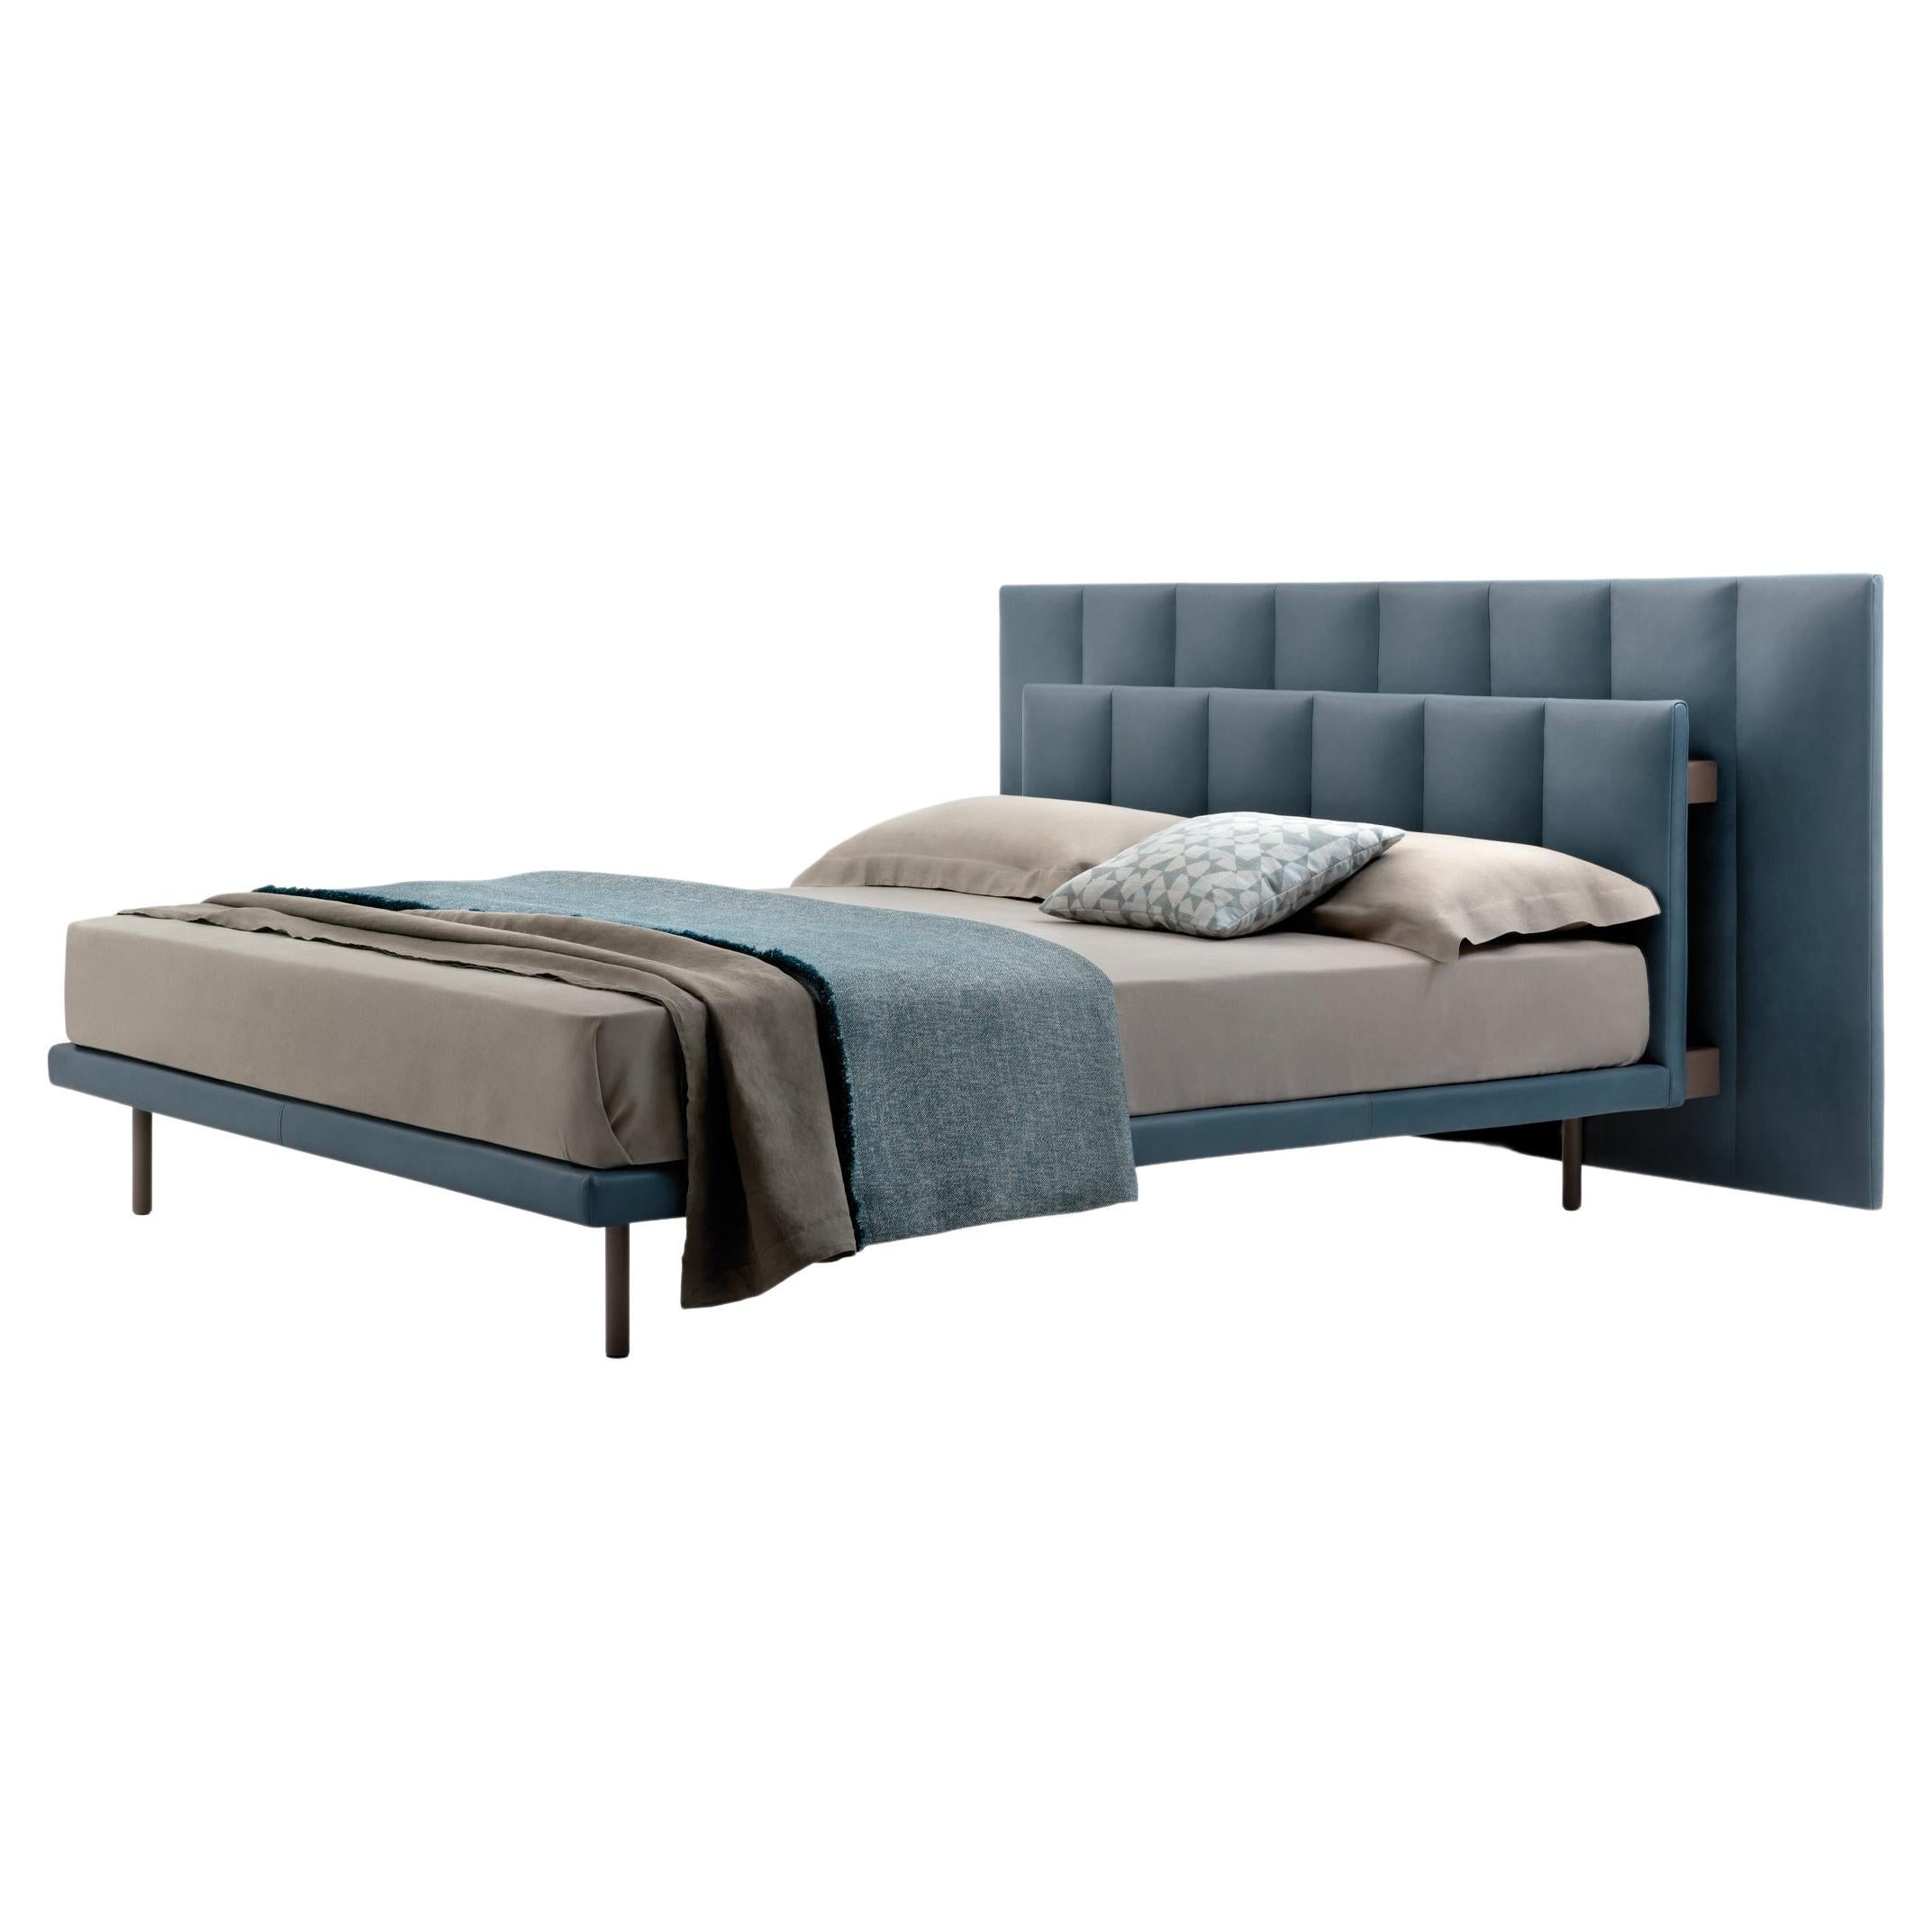 Zanotta Queen Size Grangala Bed with Single Springingin in Grey Upholstery For Sale